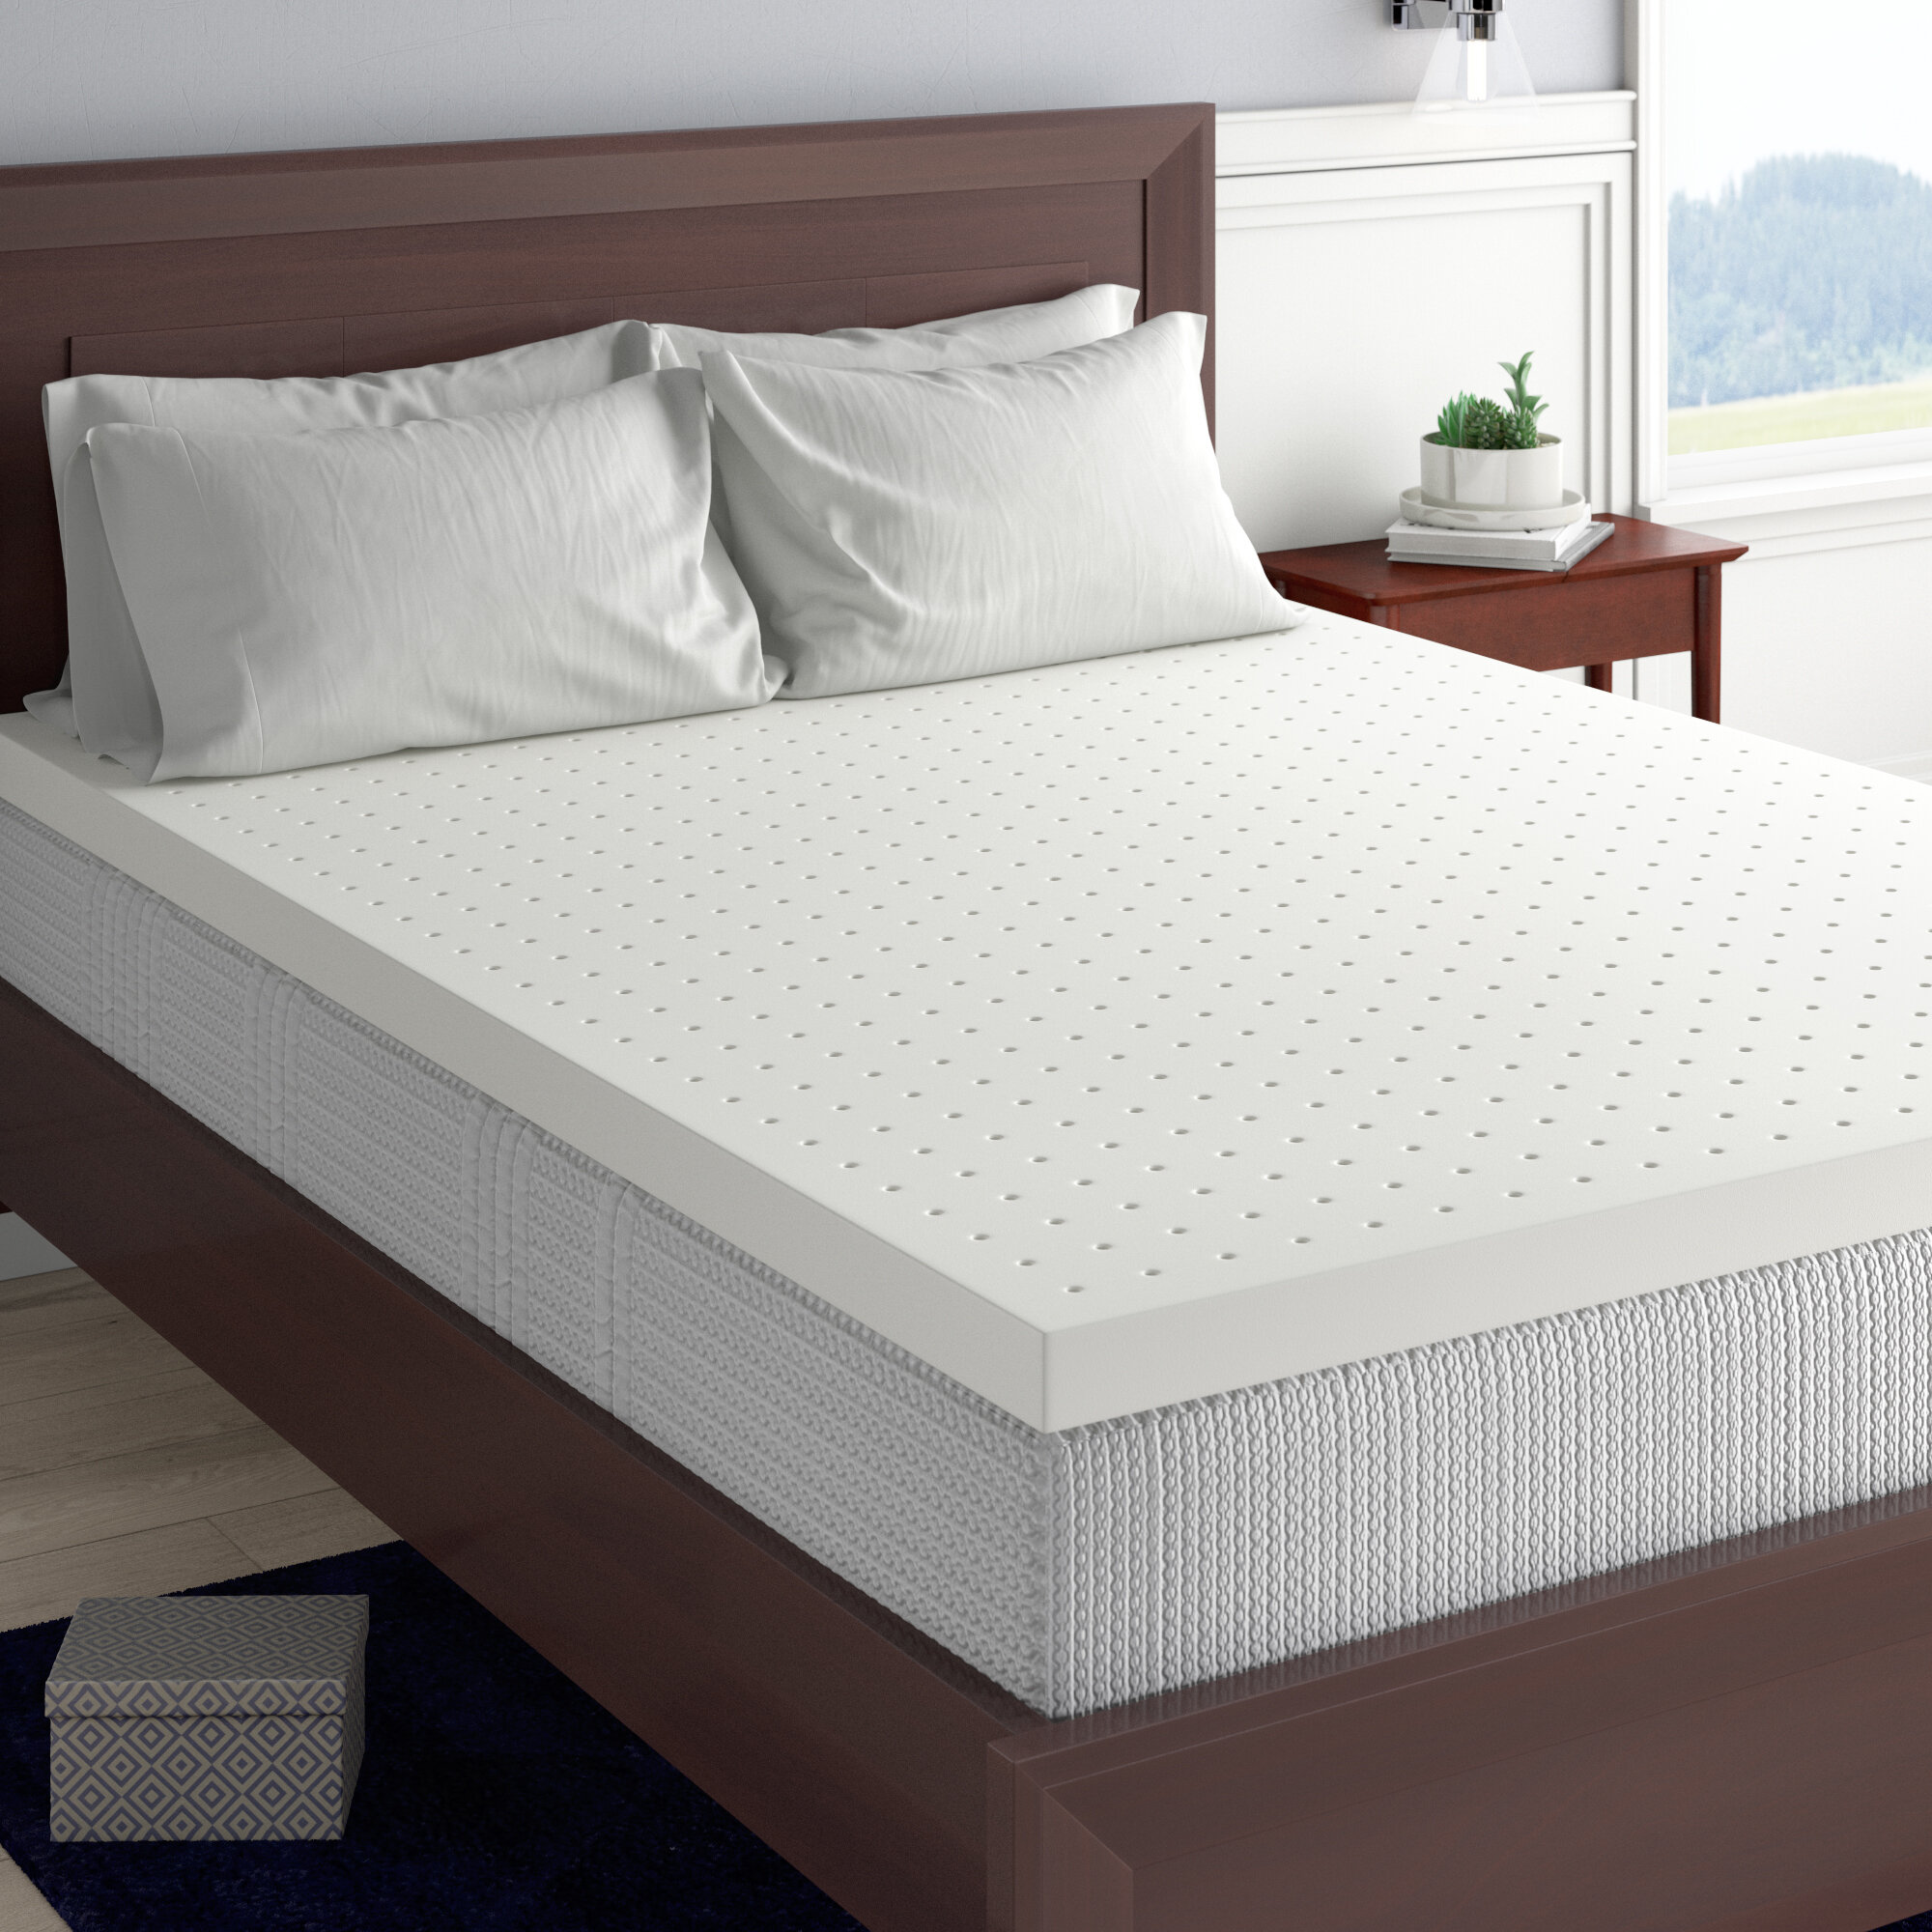 BED TOPPER 4" FULL SIZE COMFORT SELECT 2.5 FIRM FOAM MATTRESS PAD 